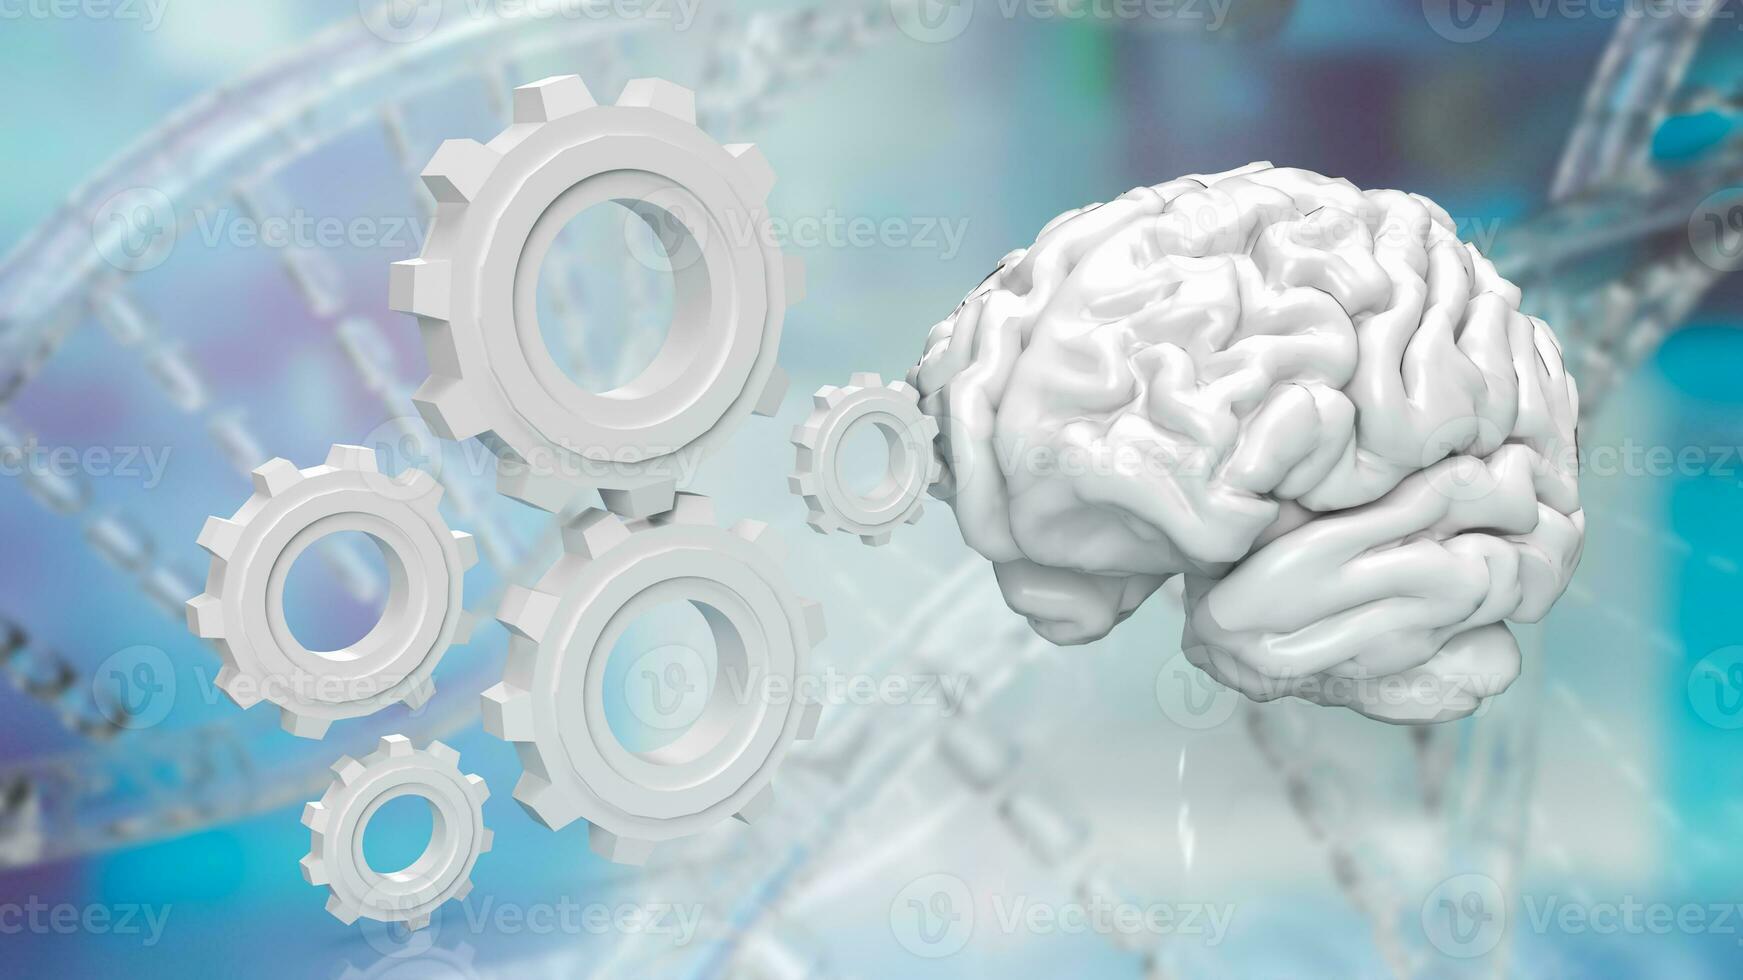 The Brain and gears on dna background 3d rendering photo